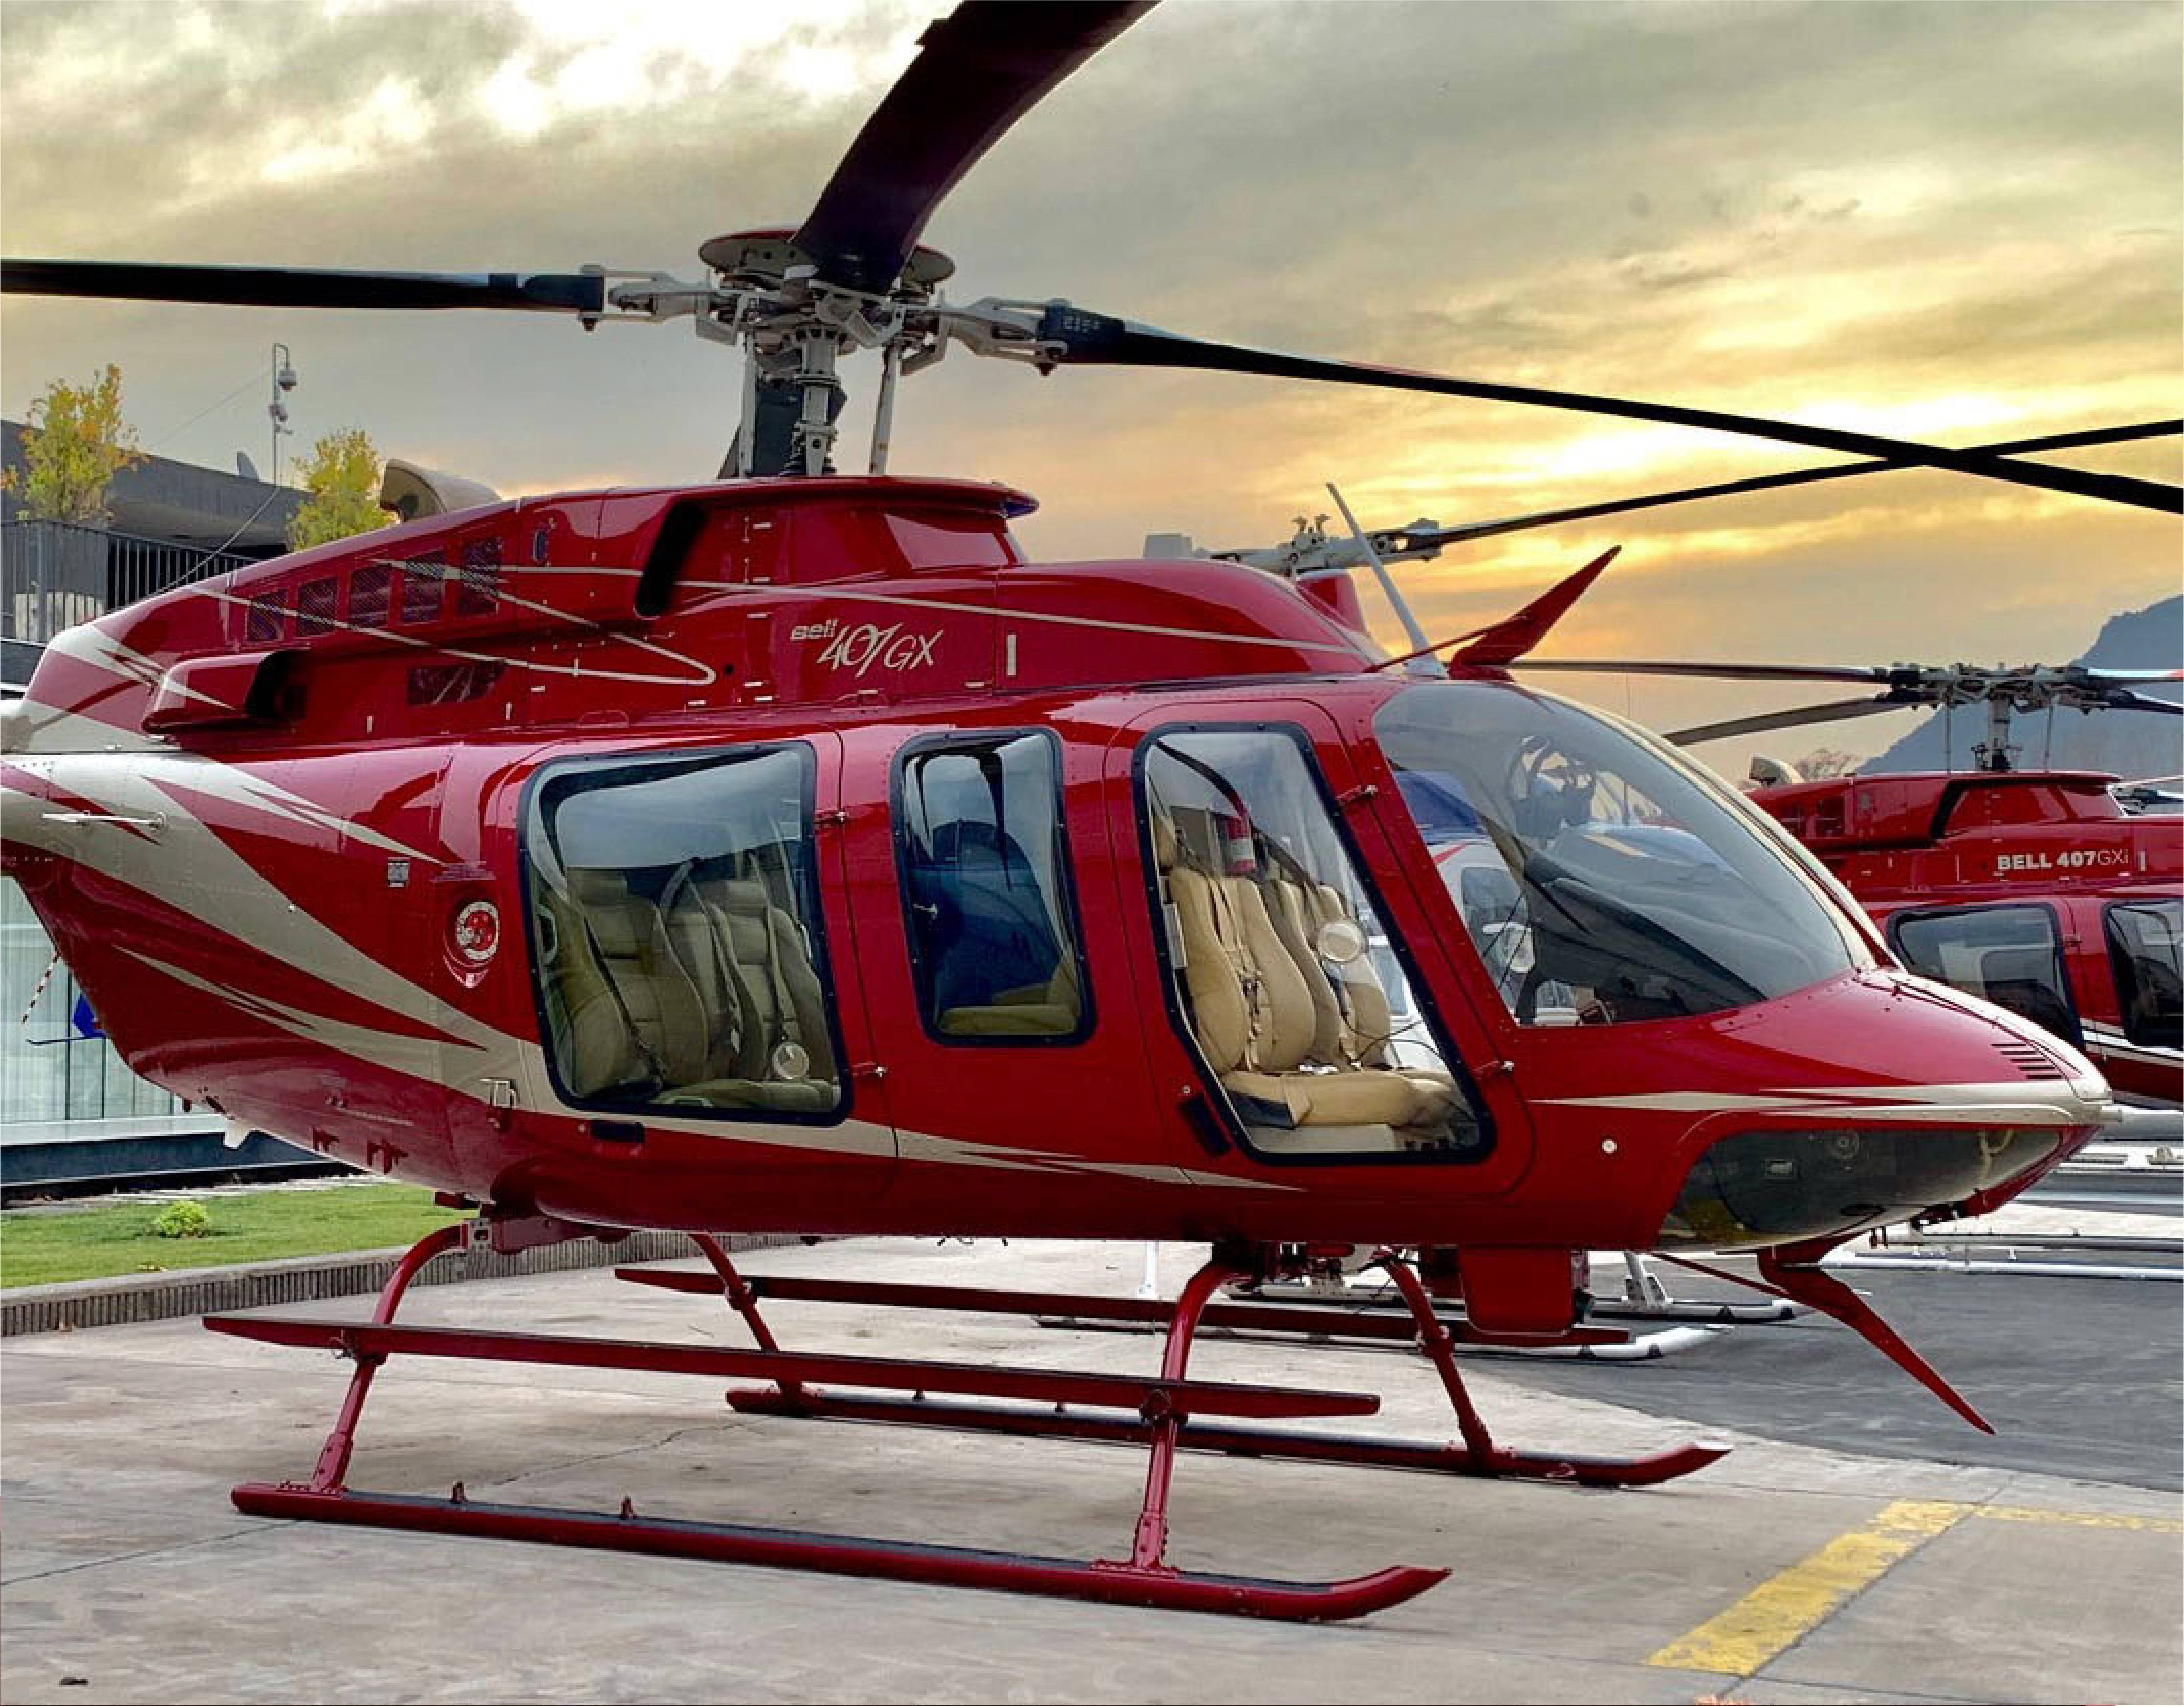 The Bell 407 with Max-Viz 1400 allows pilots to see more precisely in adverse weather conditions. Astronics Photo